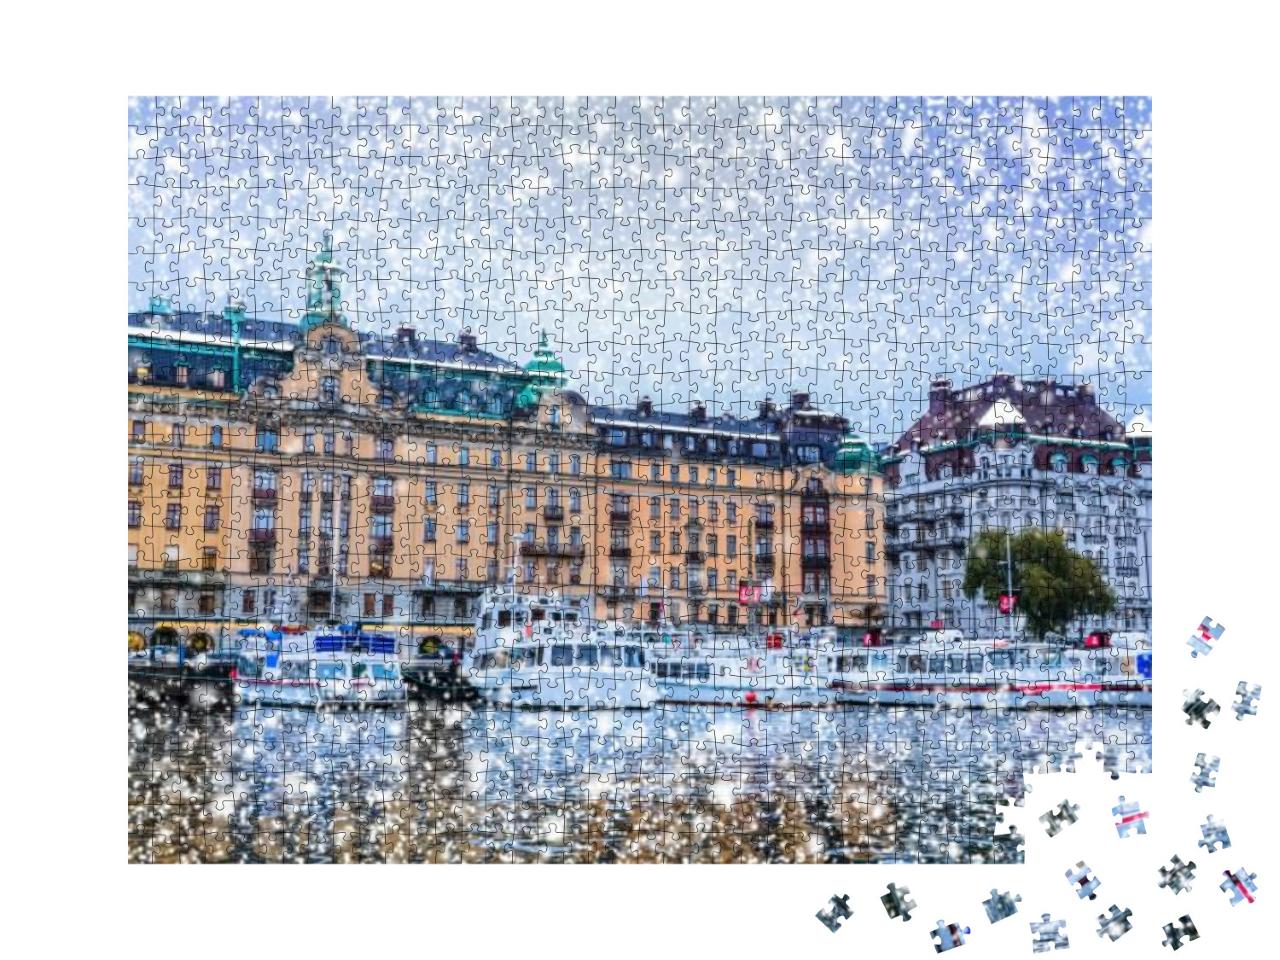 Snowfall in Stockholm Sweden with Buildings & Boats... Jigsaw Puzzle with 1000 pieces